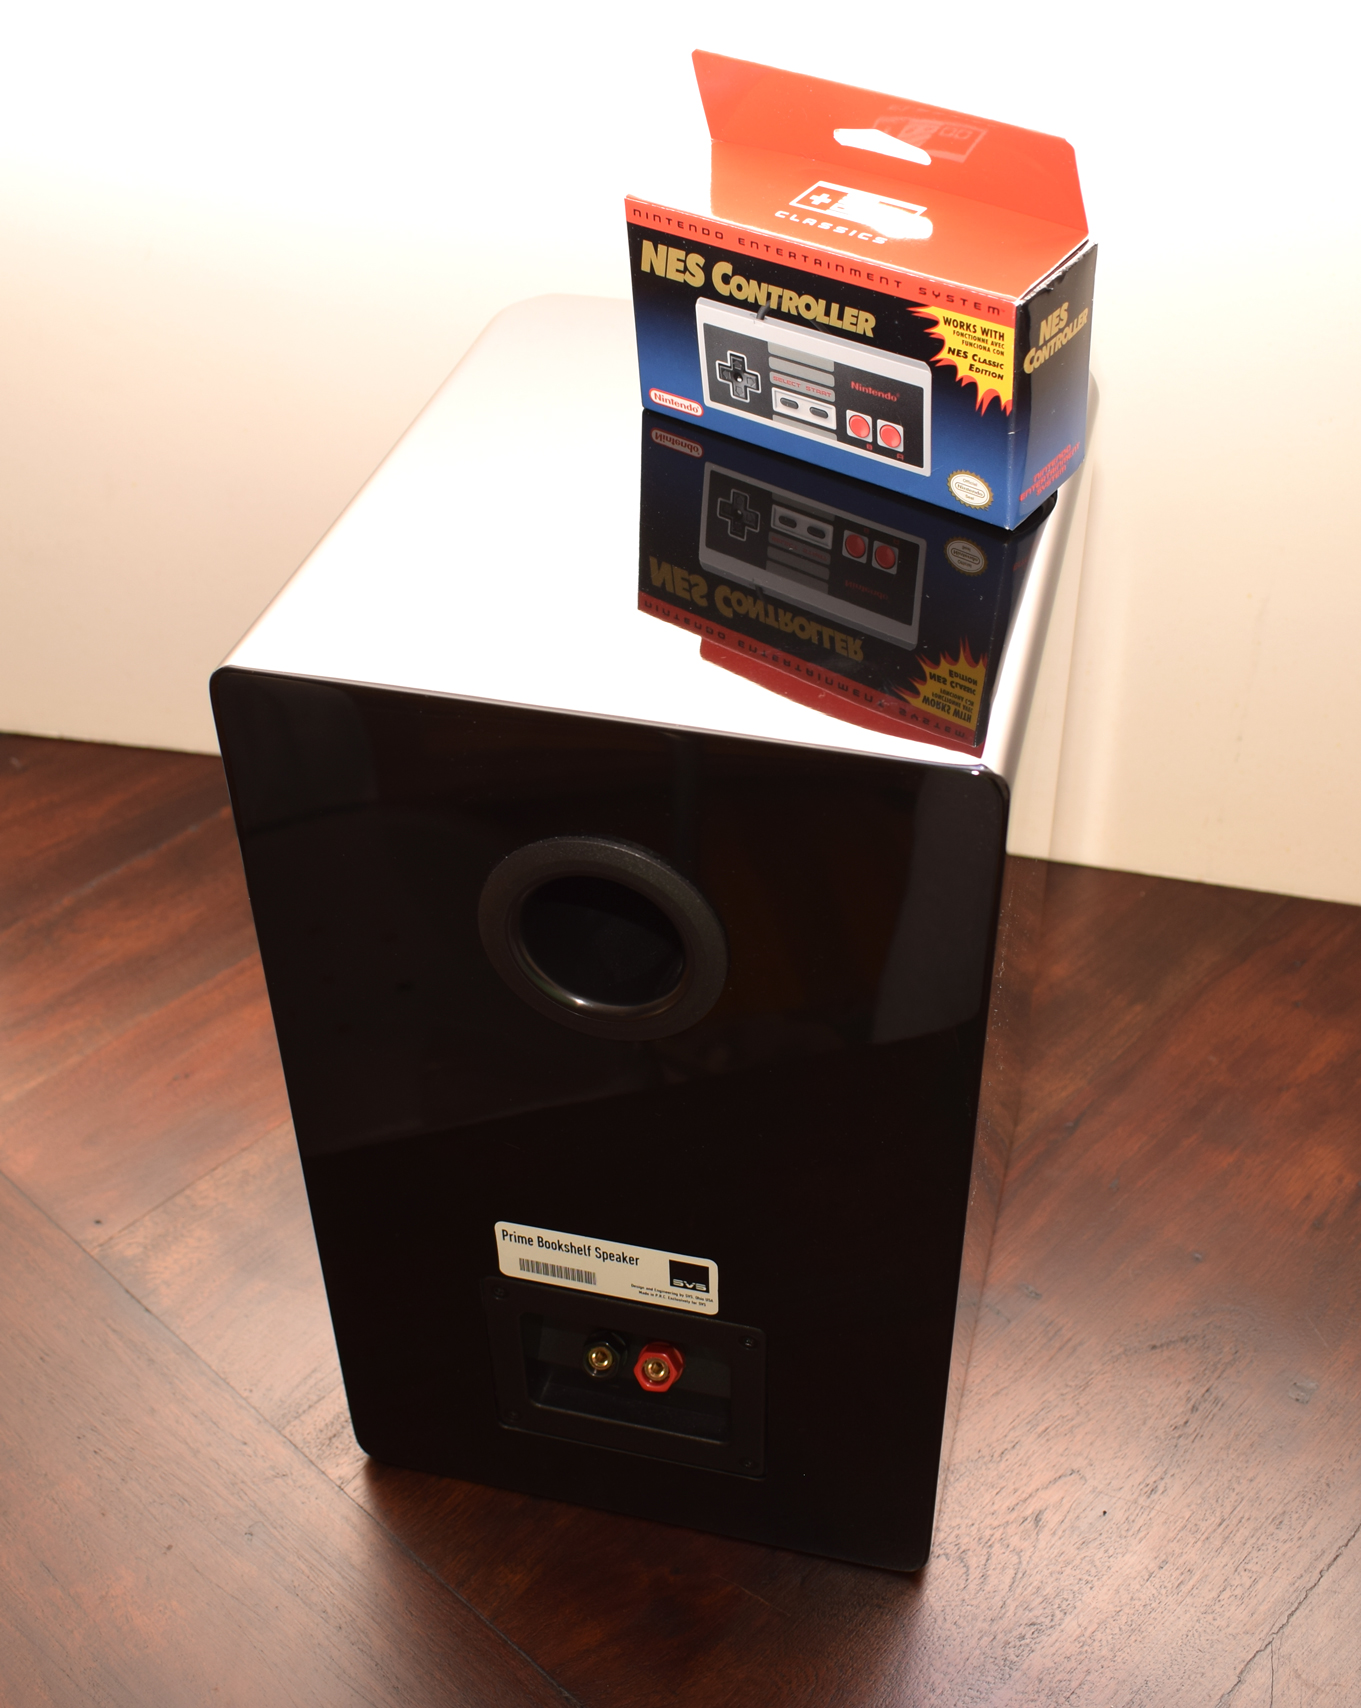 SVS Prime Bookshelf Speaker Review - Rear with NES Classic Controller